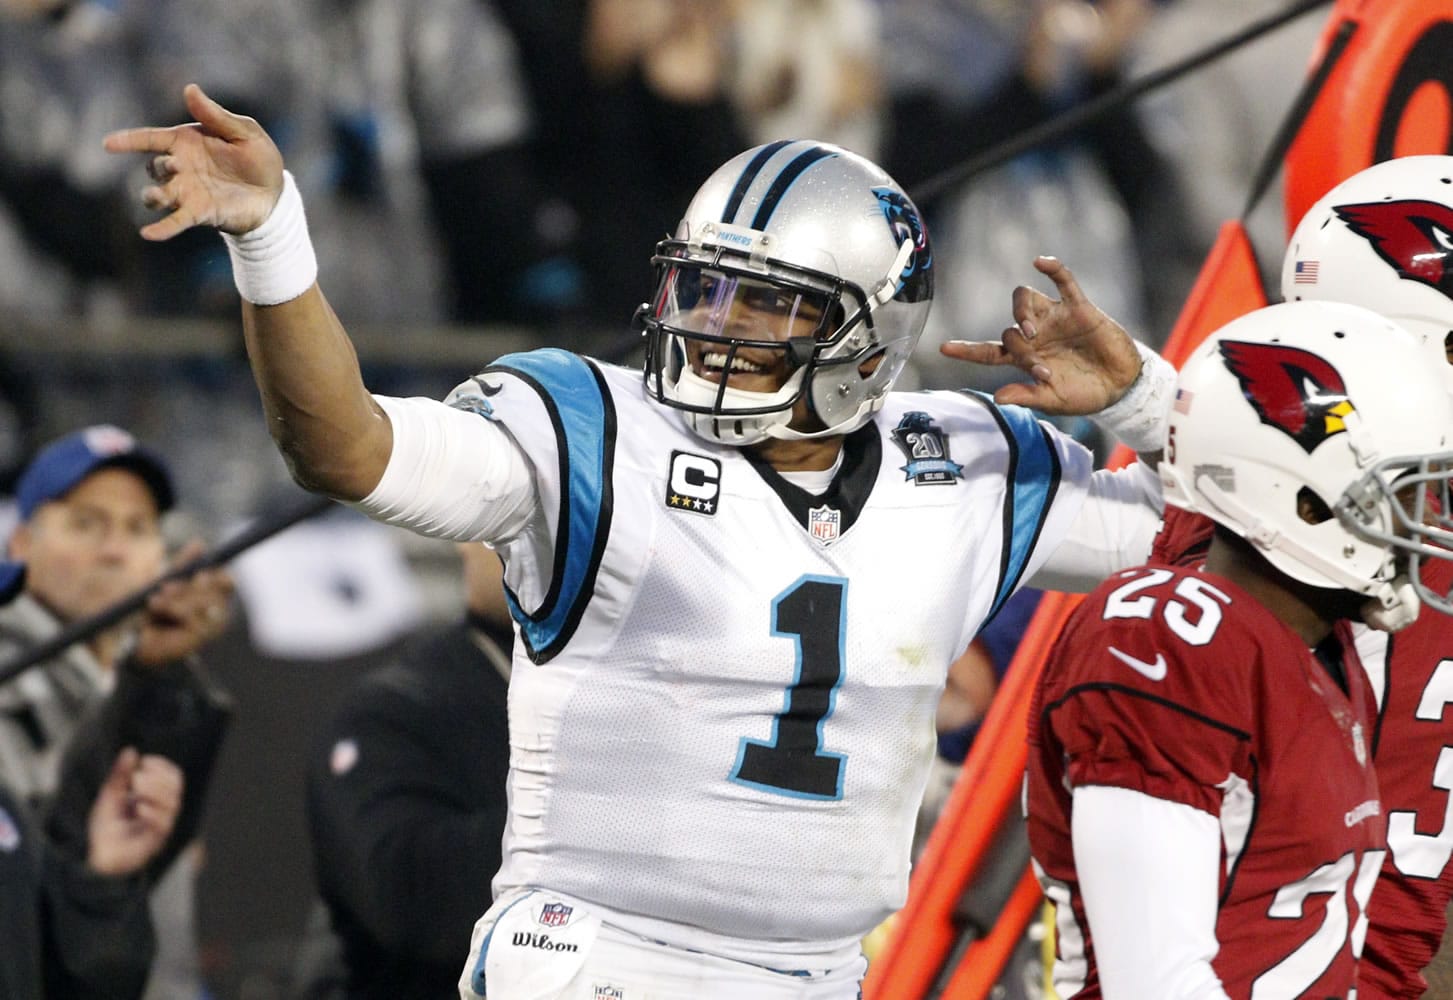 Carolina Panthers' Cam Newton (1) signals after making a first down against the Arizona Cardinals in the first half  in Charlotte, N.C., Saturday, Jan. 3, 2015.